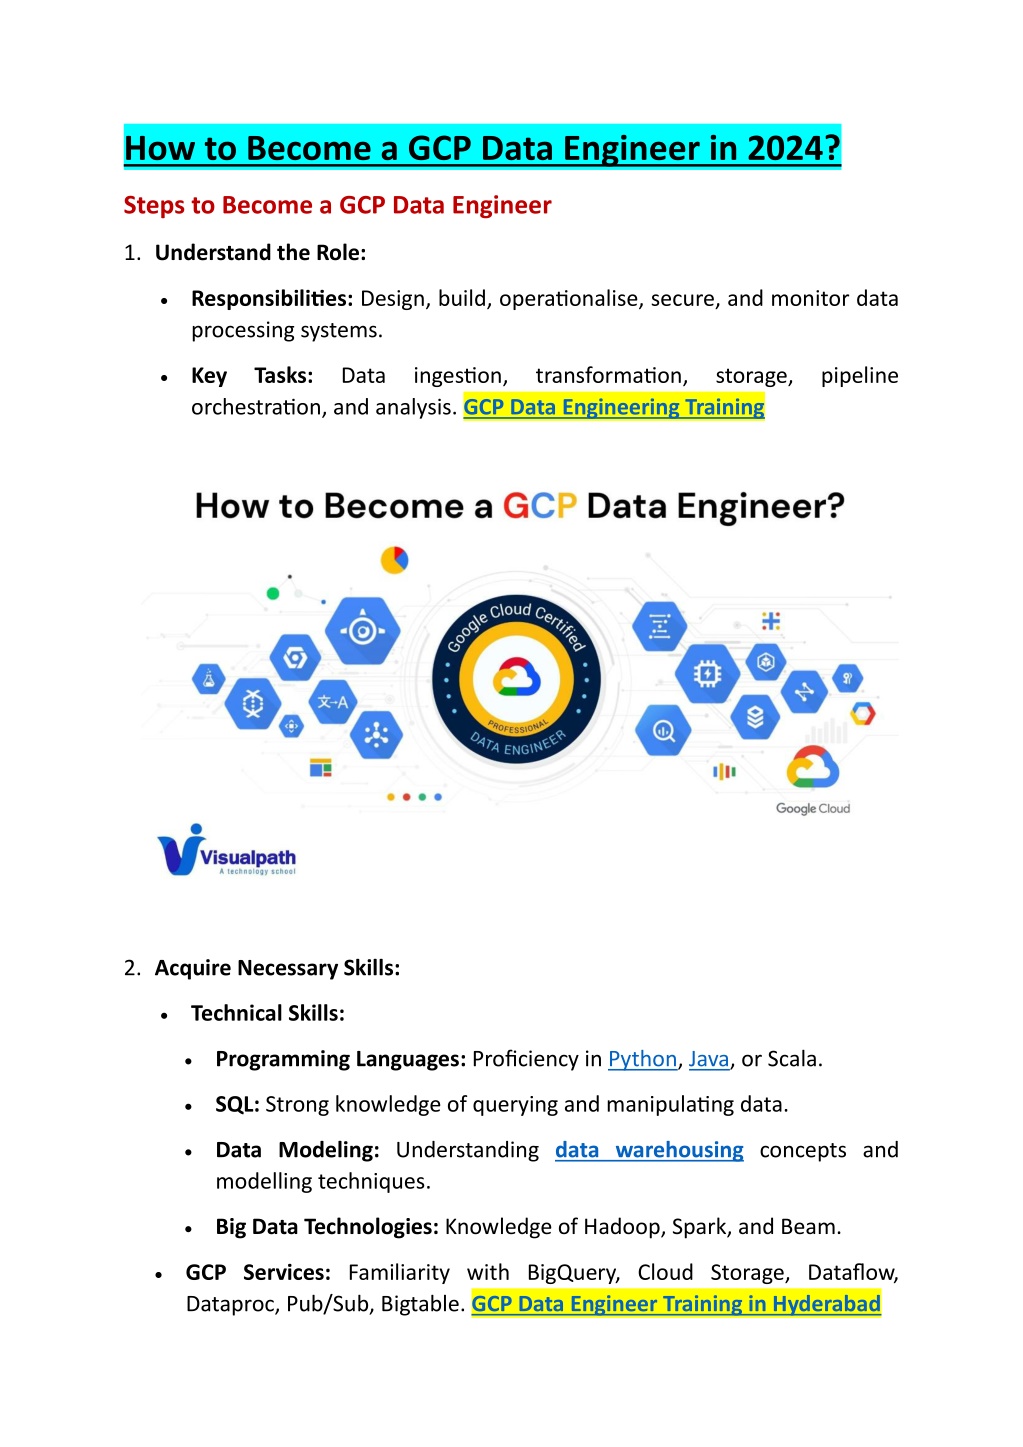 how to become a gcp data engineer in 2024 l.w